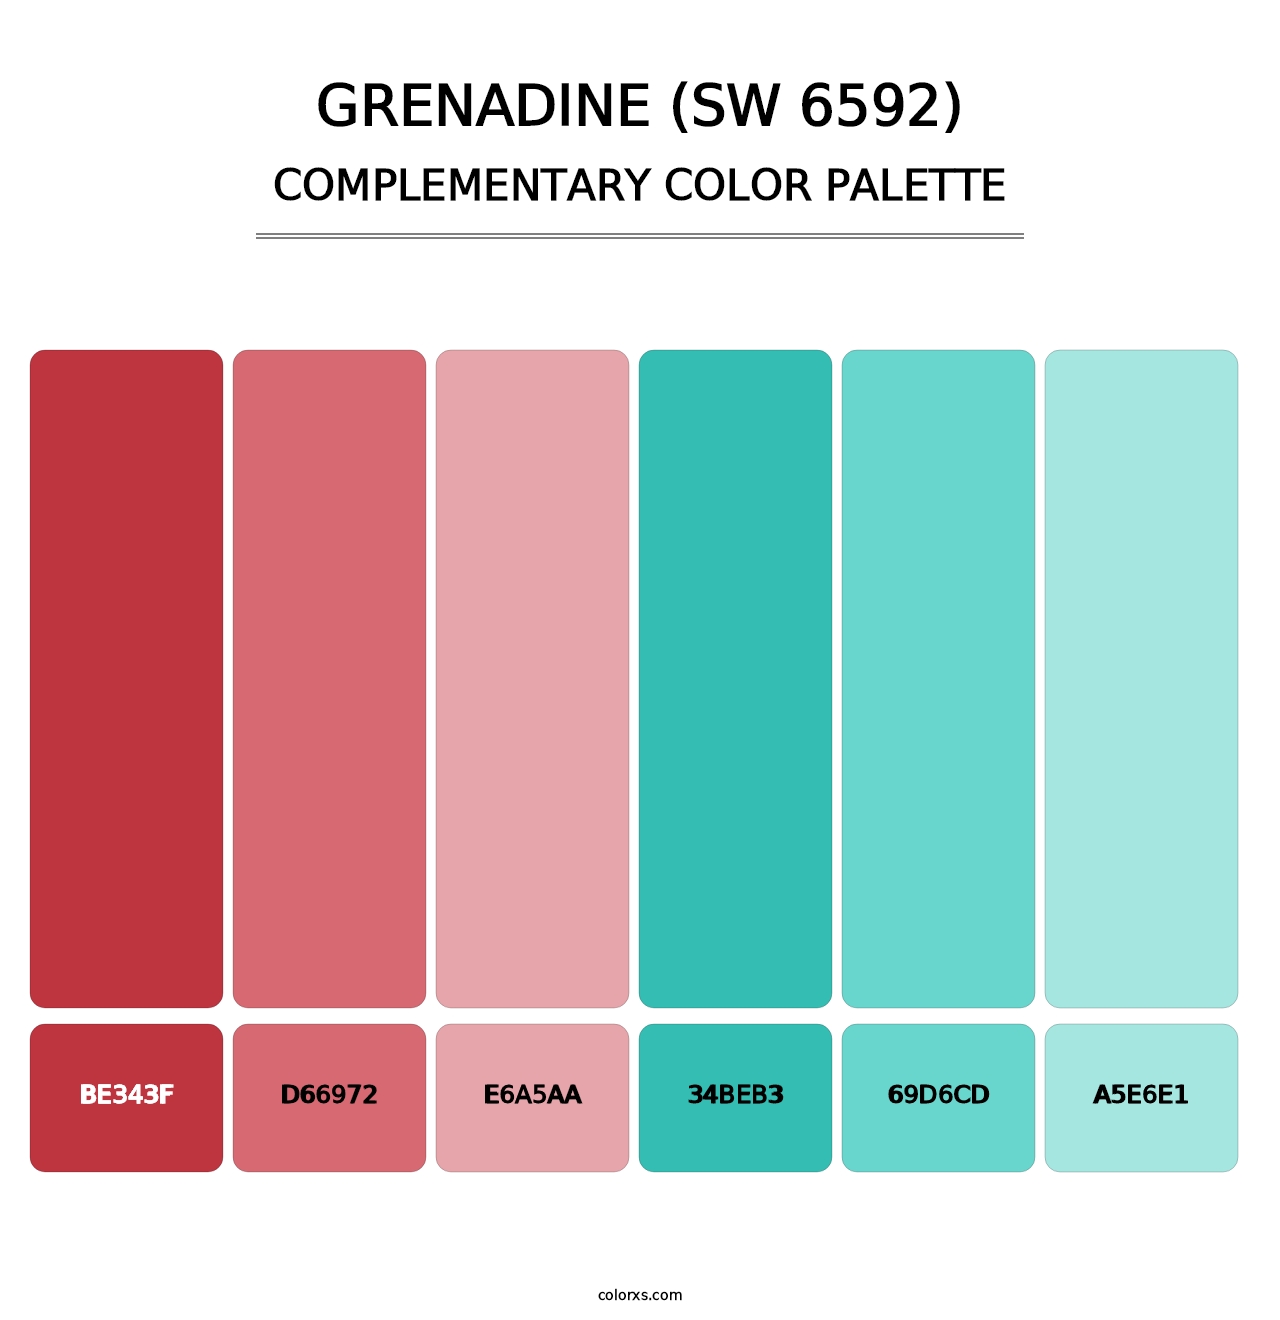 Grenadine (SW 6592) - Complementary Color Palette